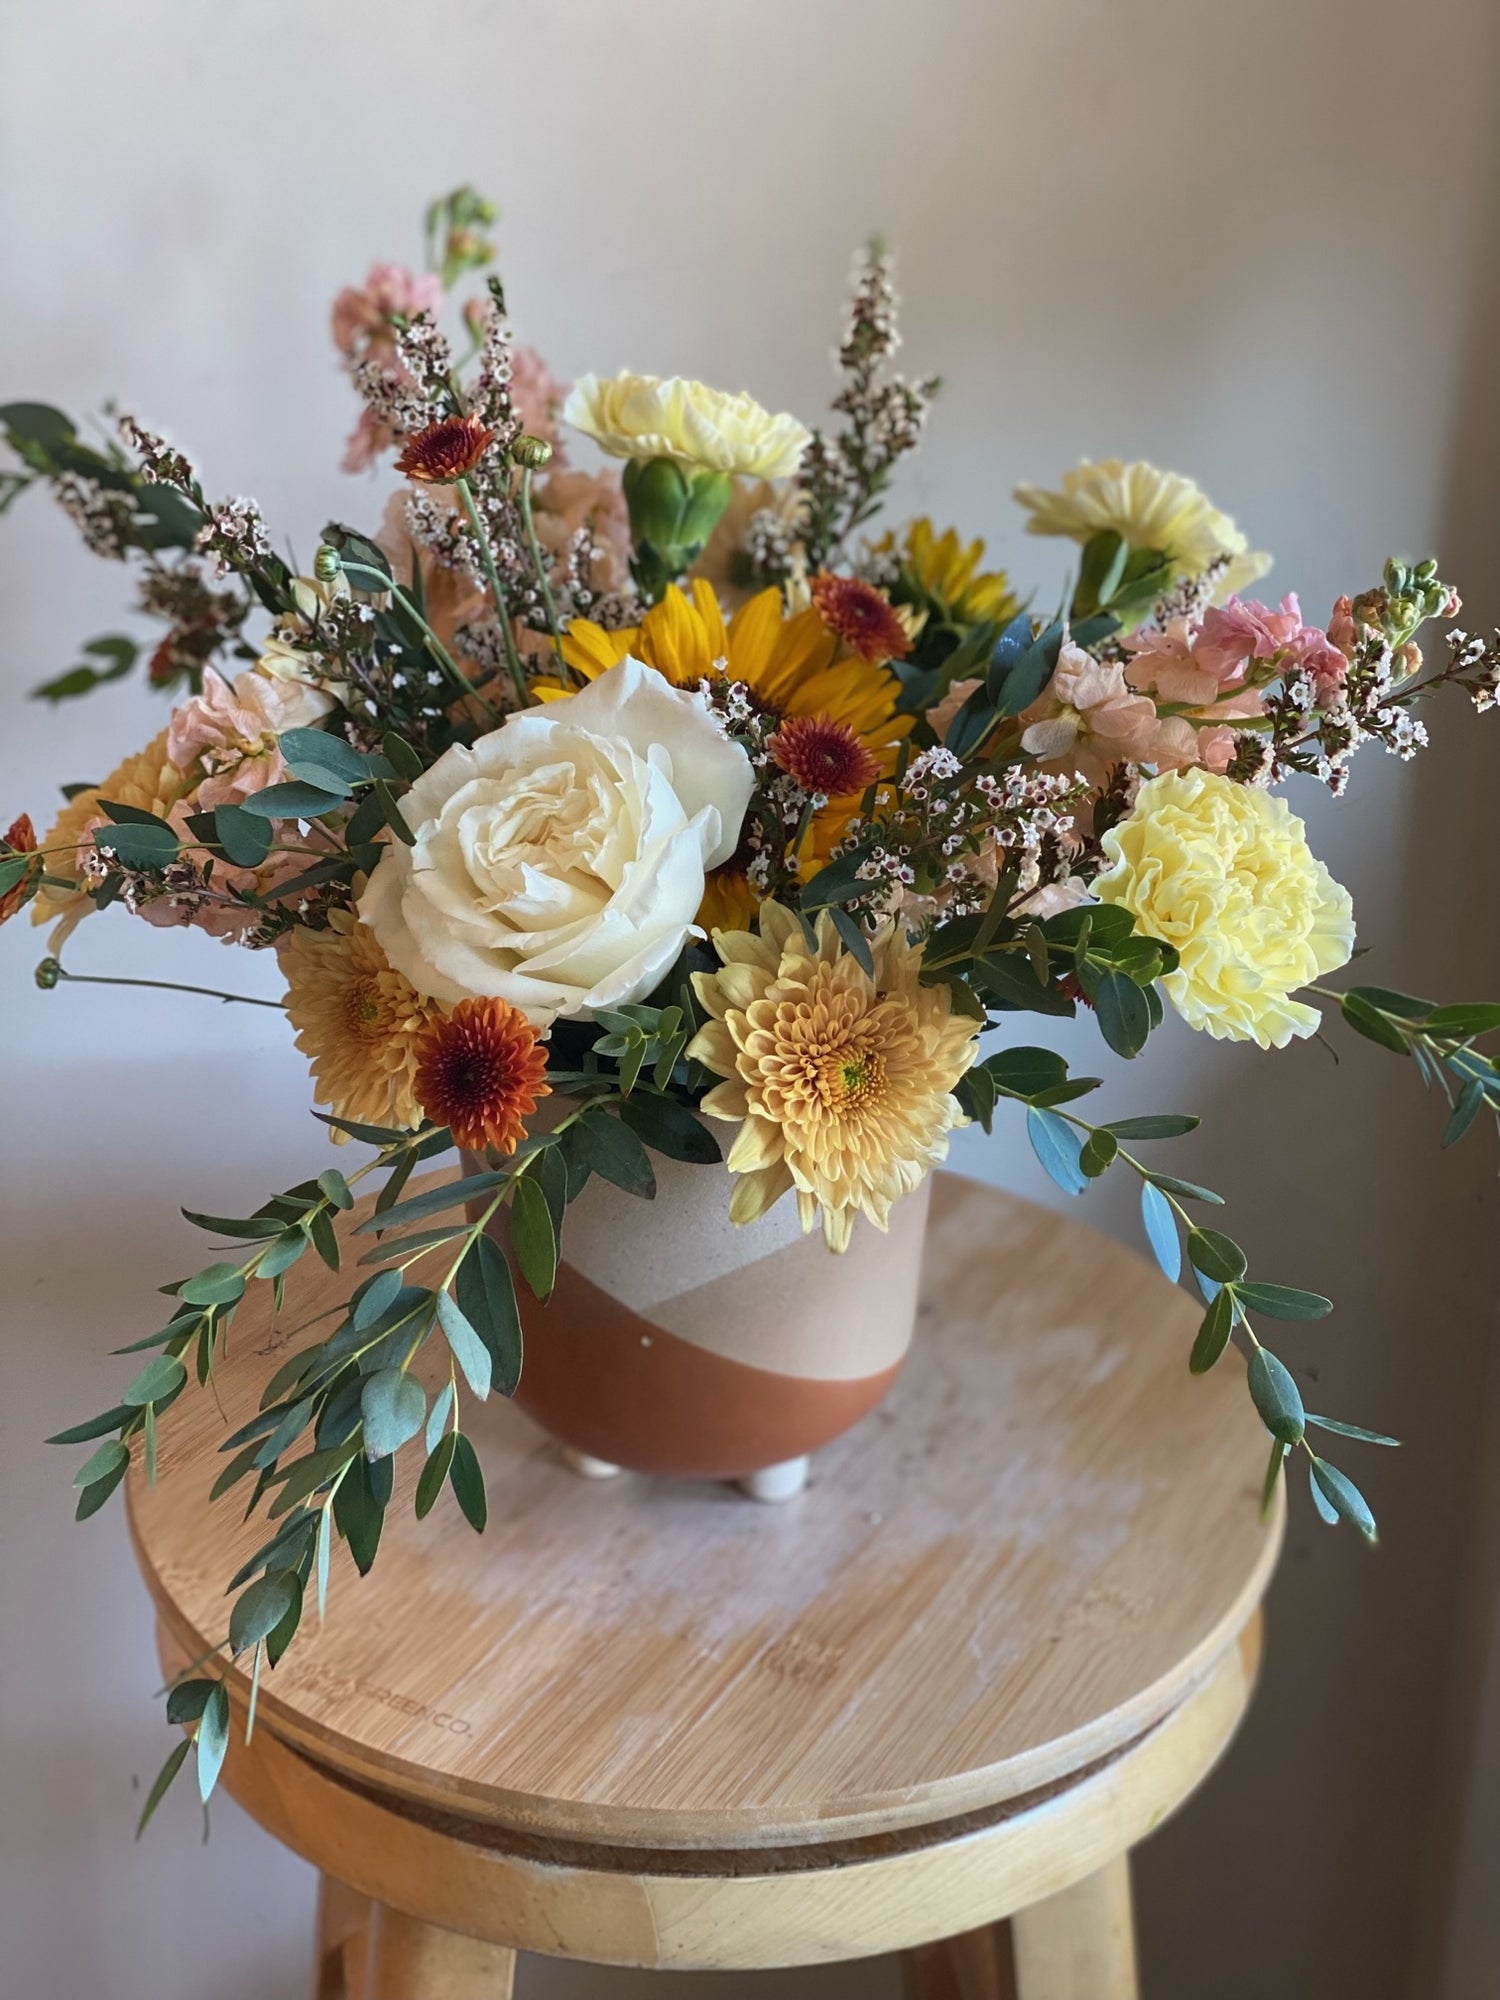 Fall flowers in shades of cream, yellow and dark orange arranged in a ceramic pot